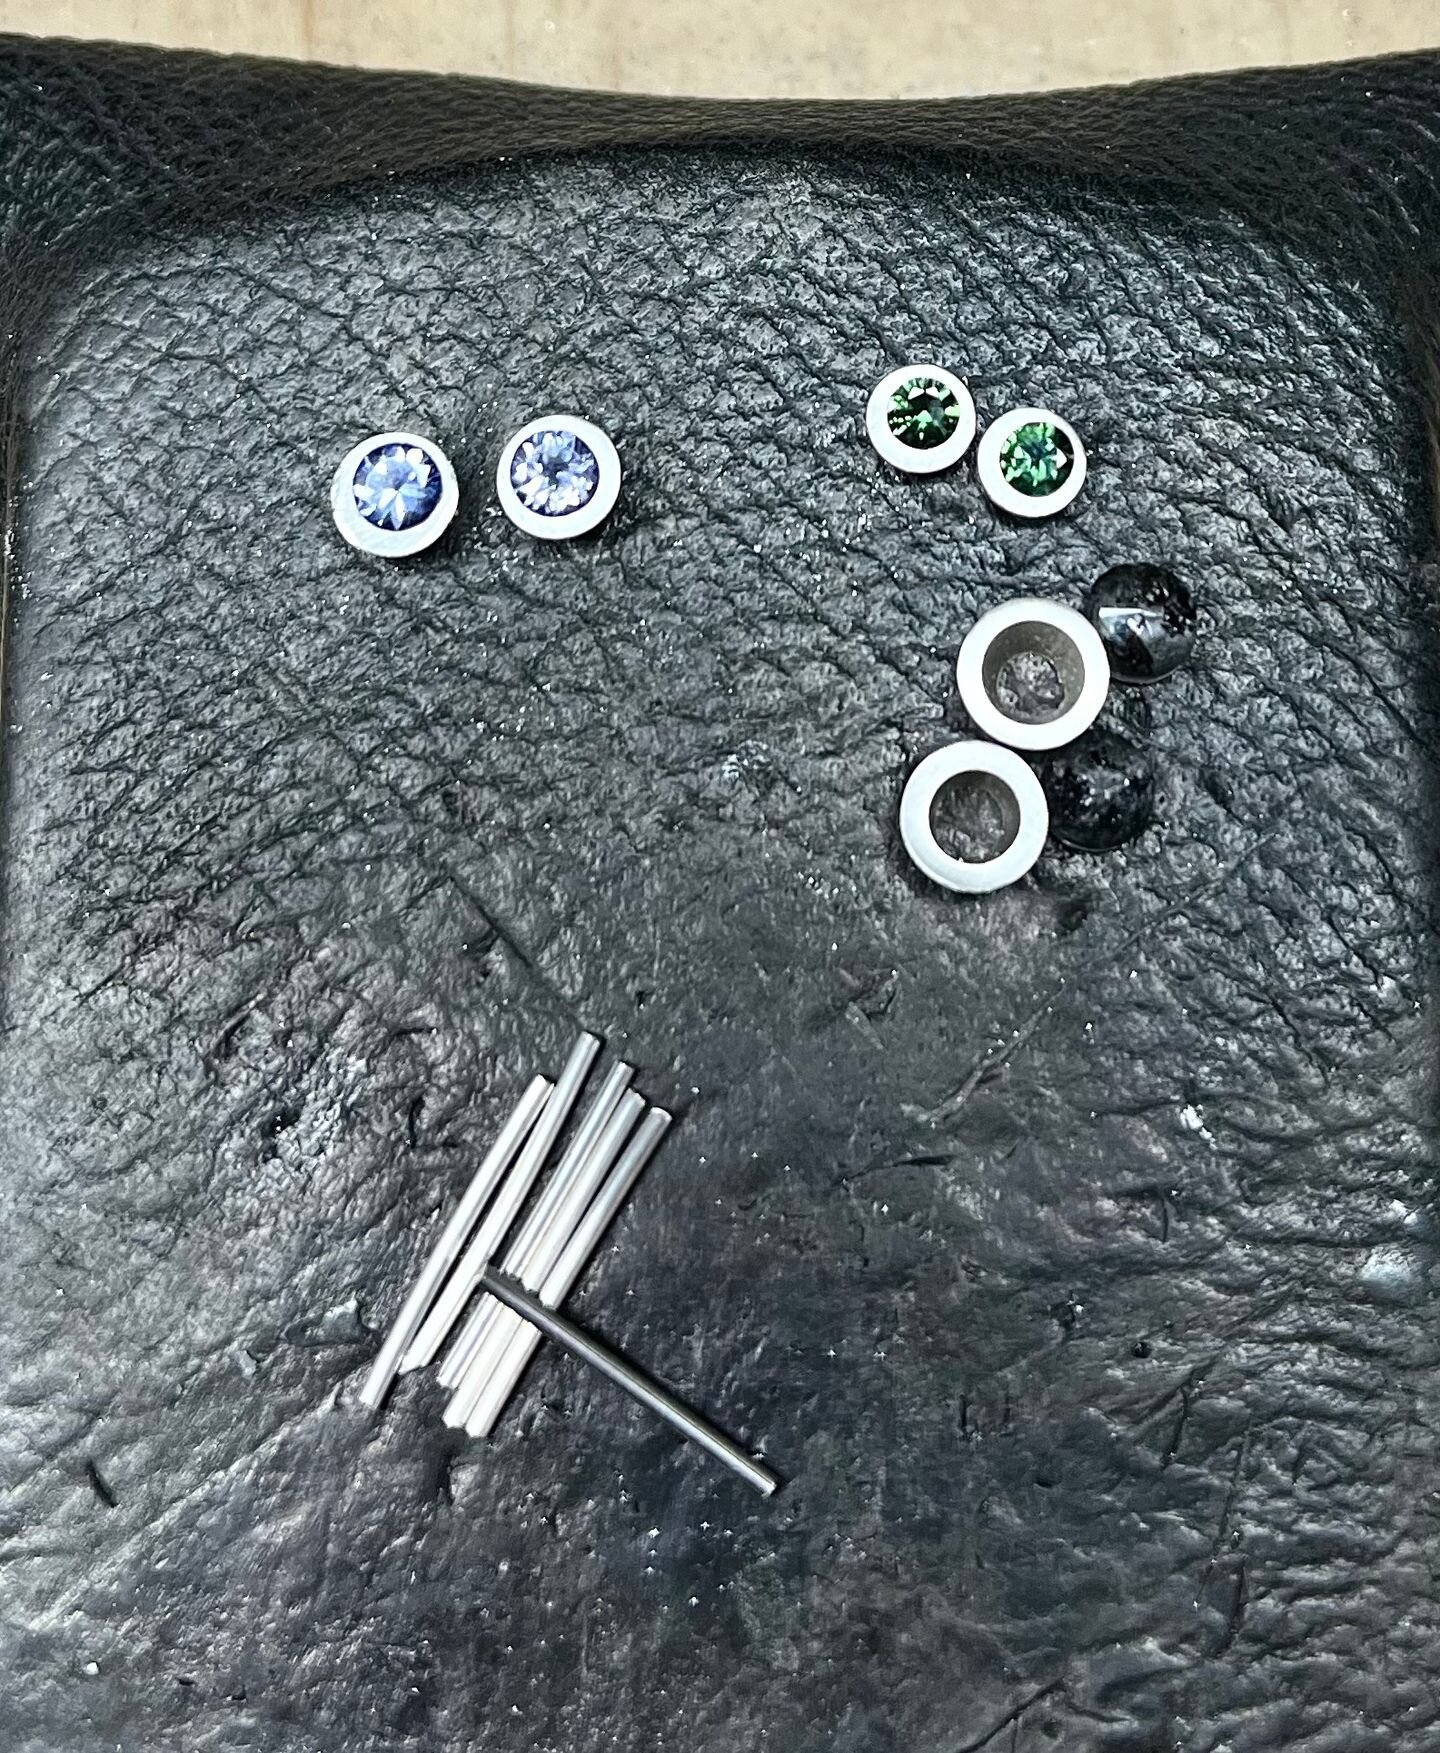 Hi. I've been catching up with some earring making while I have a chance😃 
the small studs in purple are Tanzanite, the green ones are really gorgeous green Australian Sapphires and a couple of Pairs of roller printed fine silver earrings. 
This Sat